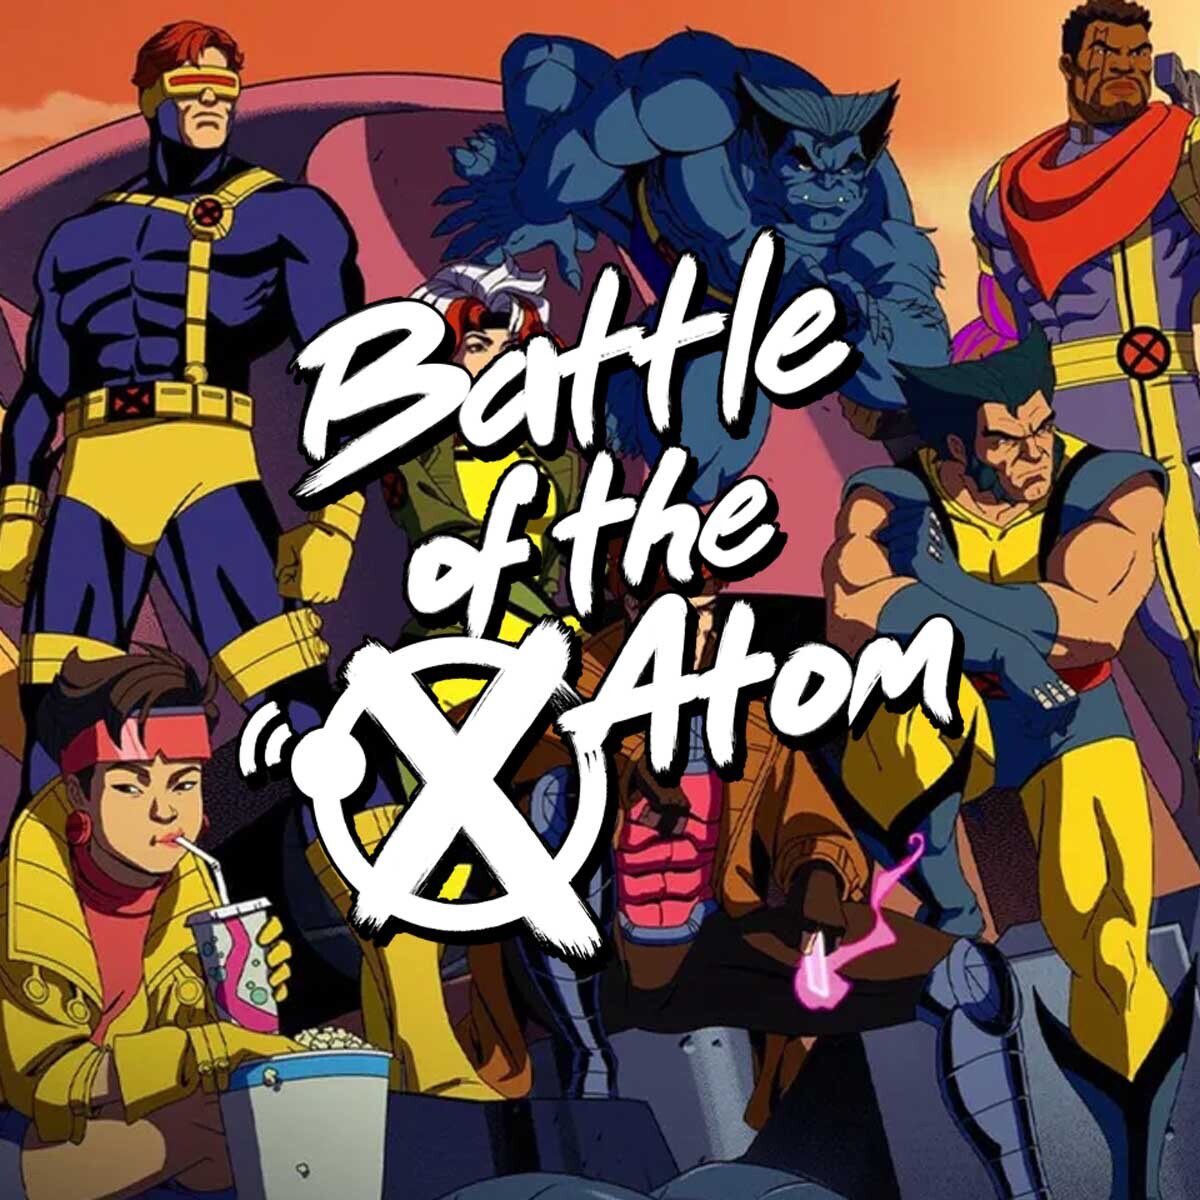 TOMORROW! Don’t miss an All-New #BattleoftheAtom We’re talking about comics that adapt cartoons that adapt comics - and our many thoughts on #xmen97